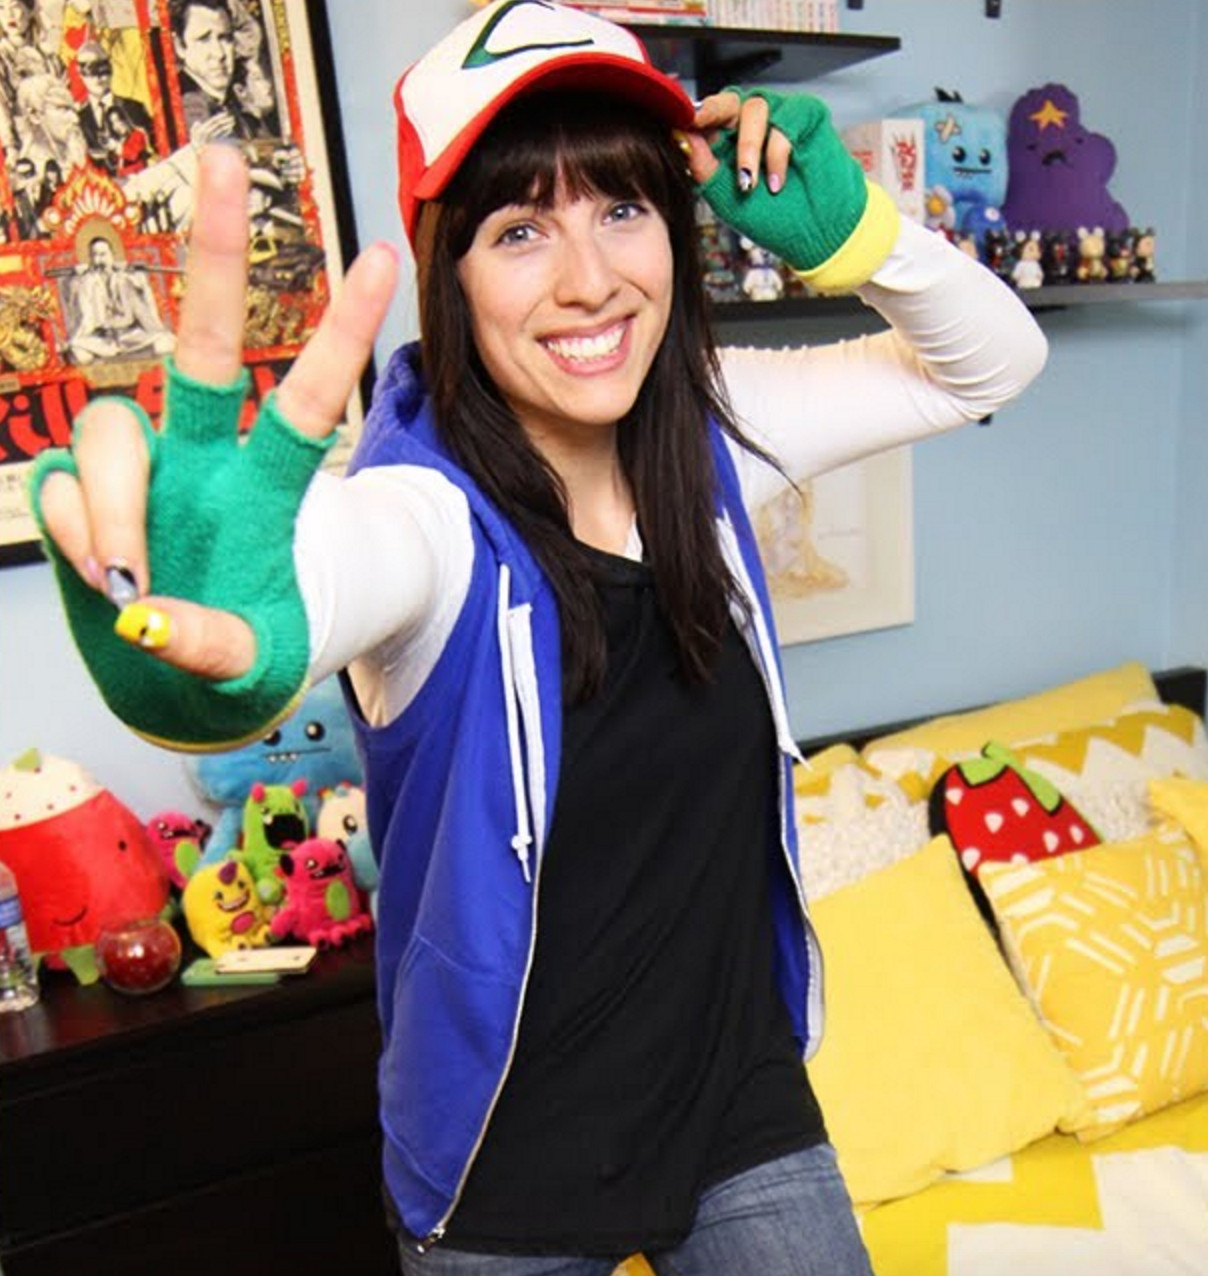 Ash Ketchum Costume DIY
 16 Pokemon Costumes to Wear for Halloween This Year